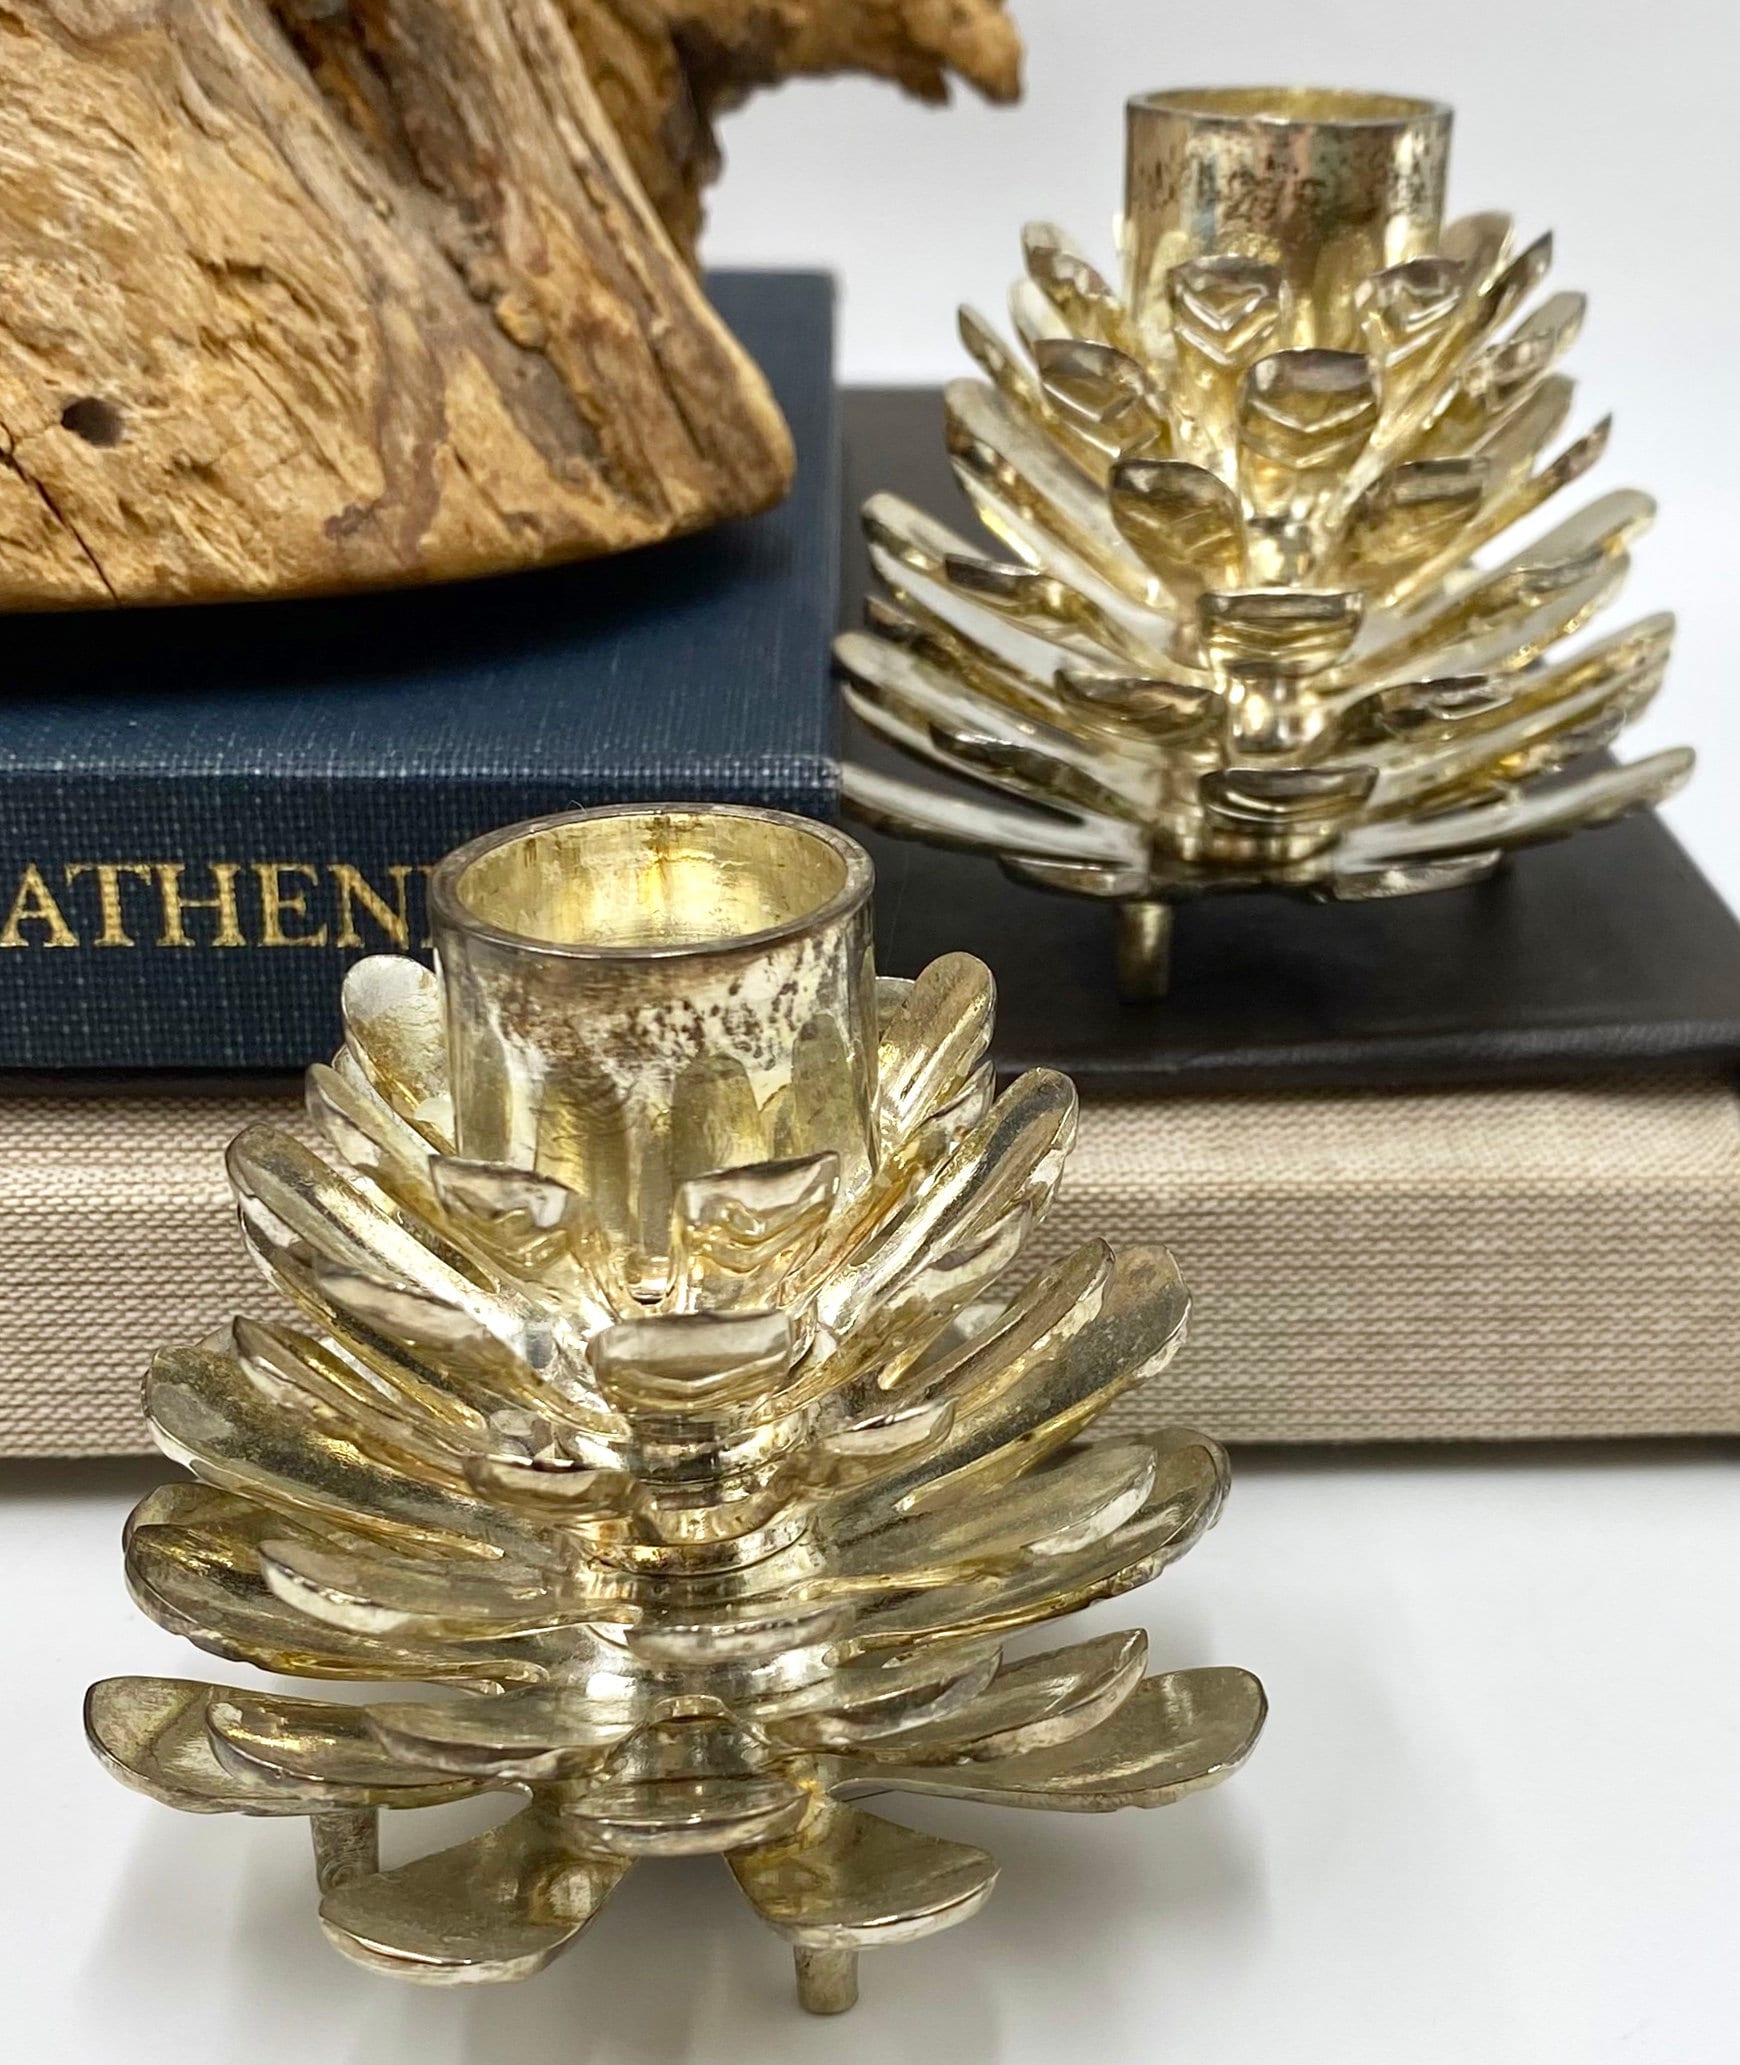 One Small Brass Pinecone Candlestick Candle Holder Vintage -  Canada